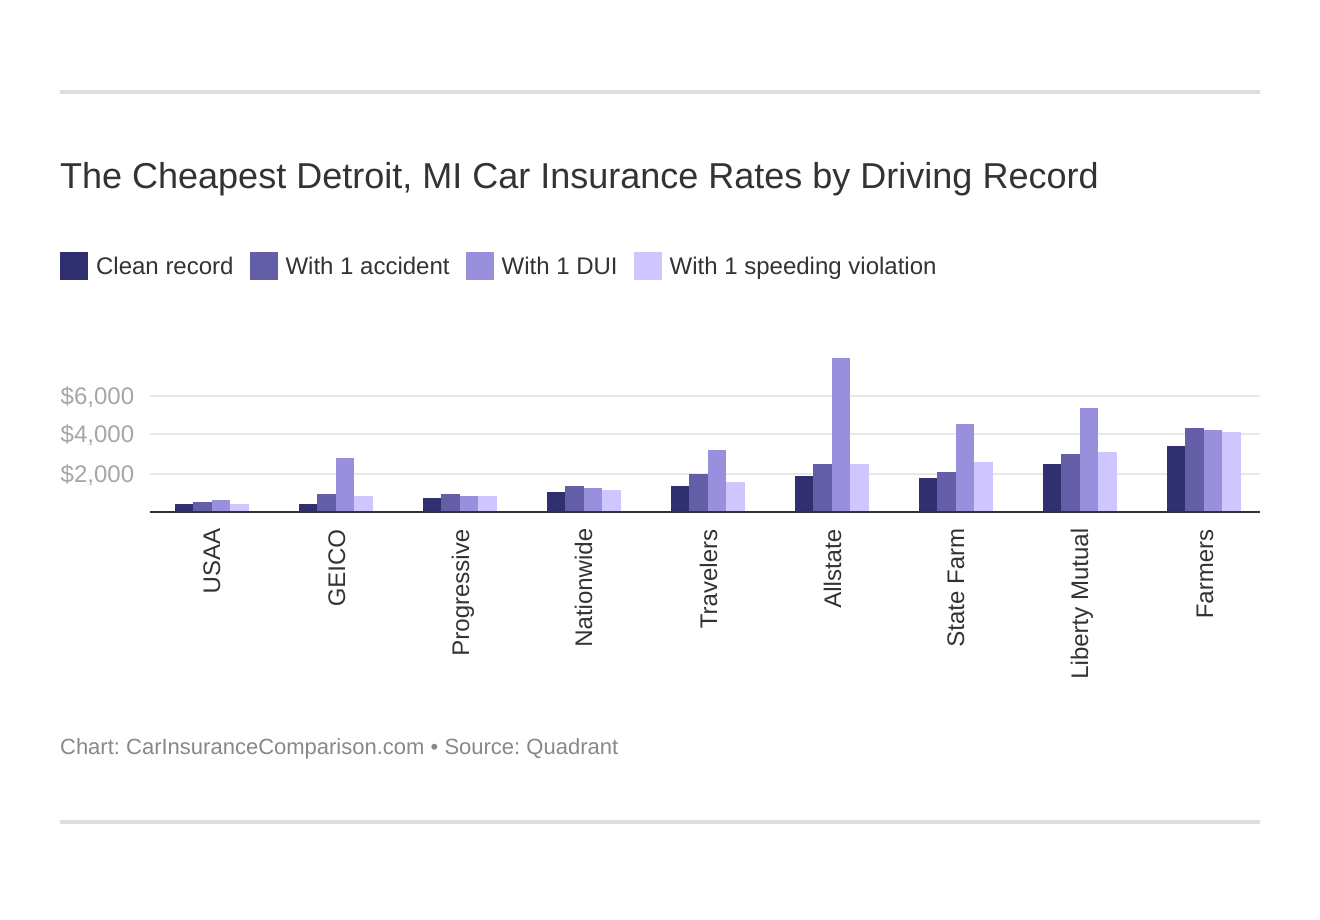 The Cheapest Detroit, MI Car Insurance Rates by Driving Record